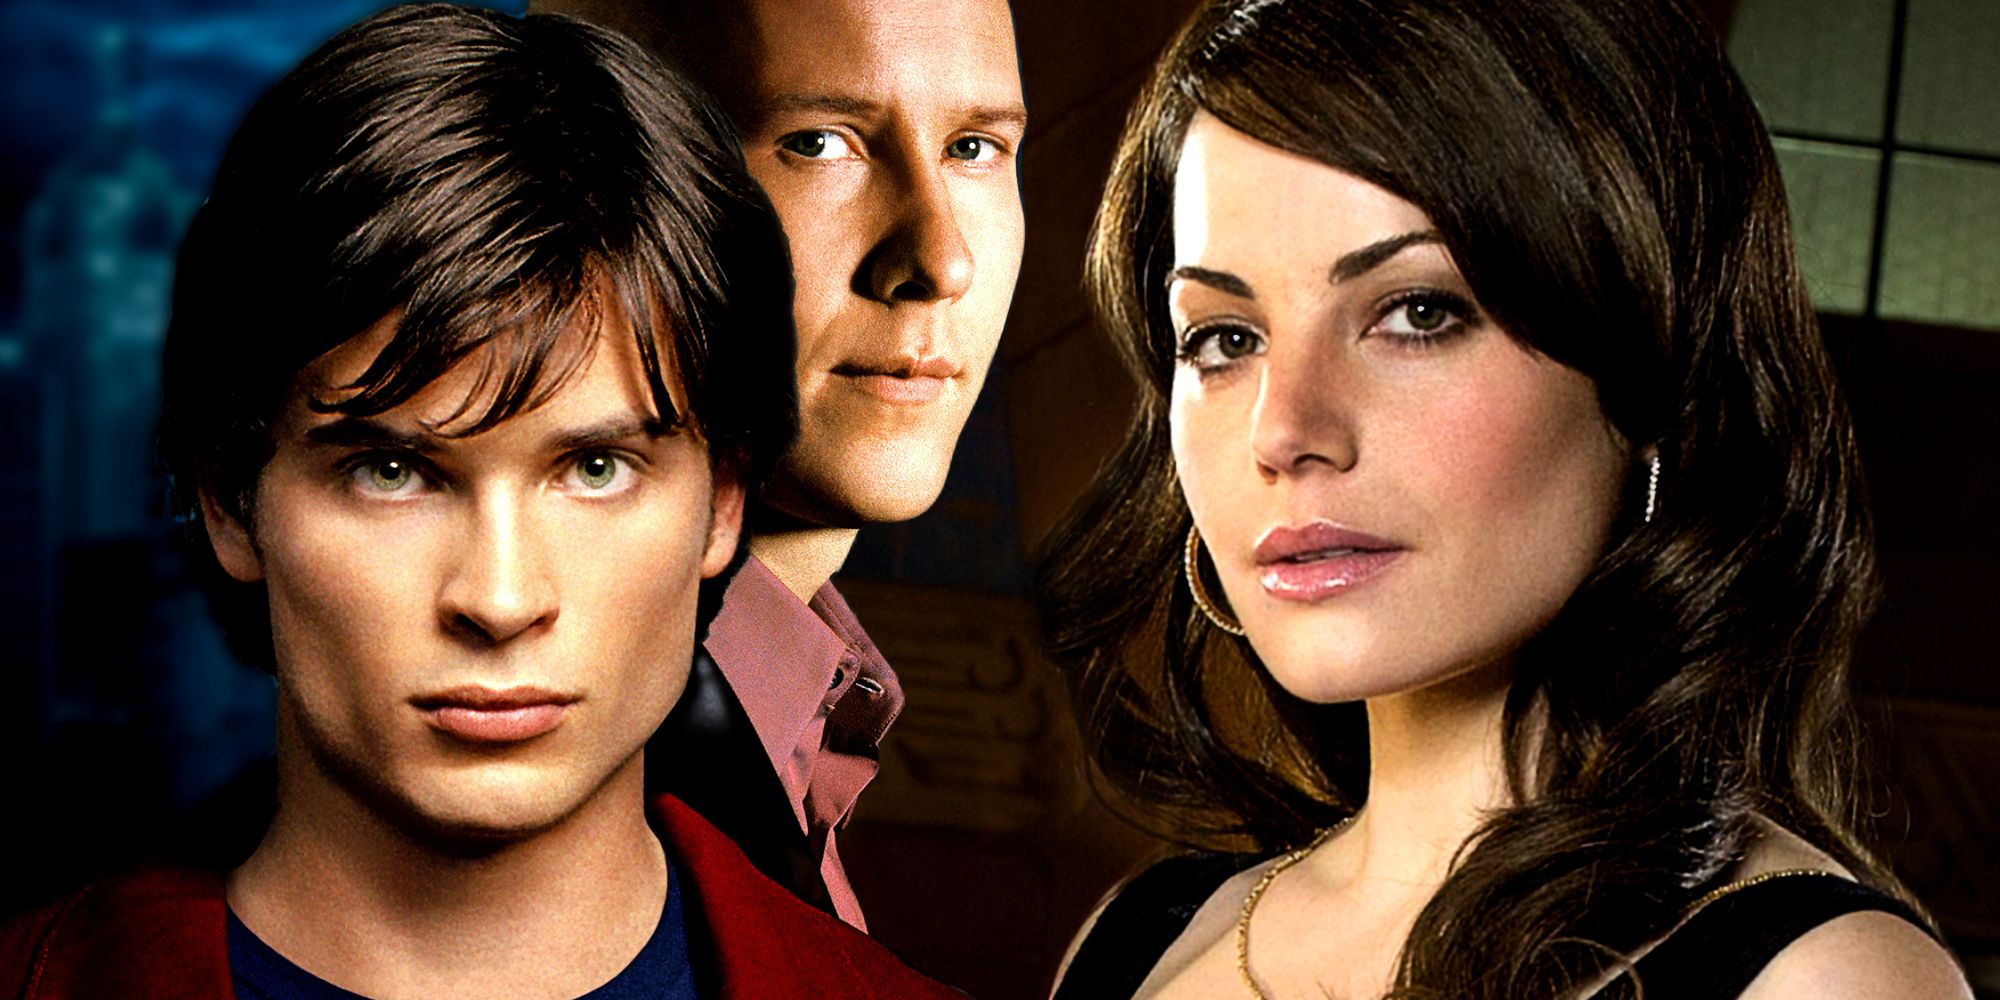 Smallville’s Tom Welling Explains In Detail What Made Lois Lane’s Introduction So Amazing